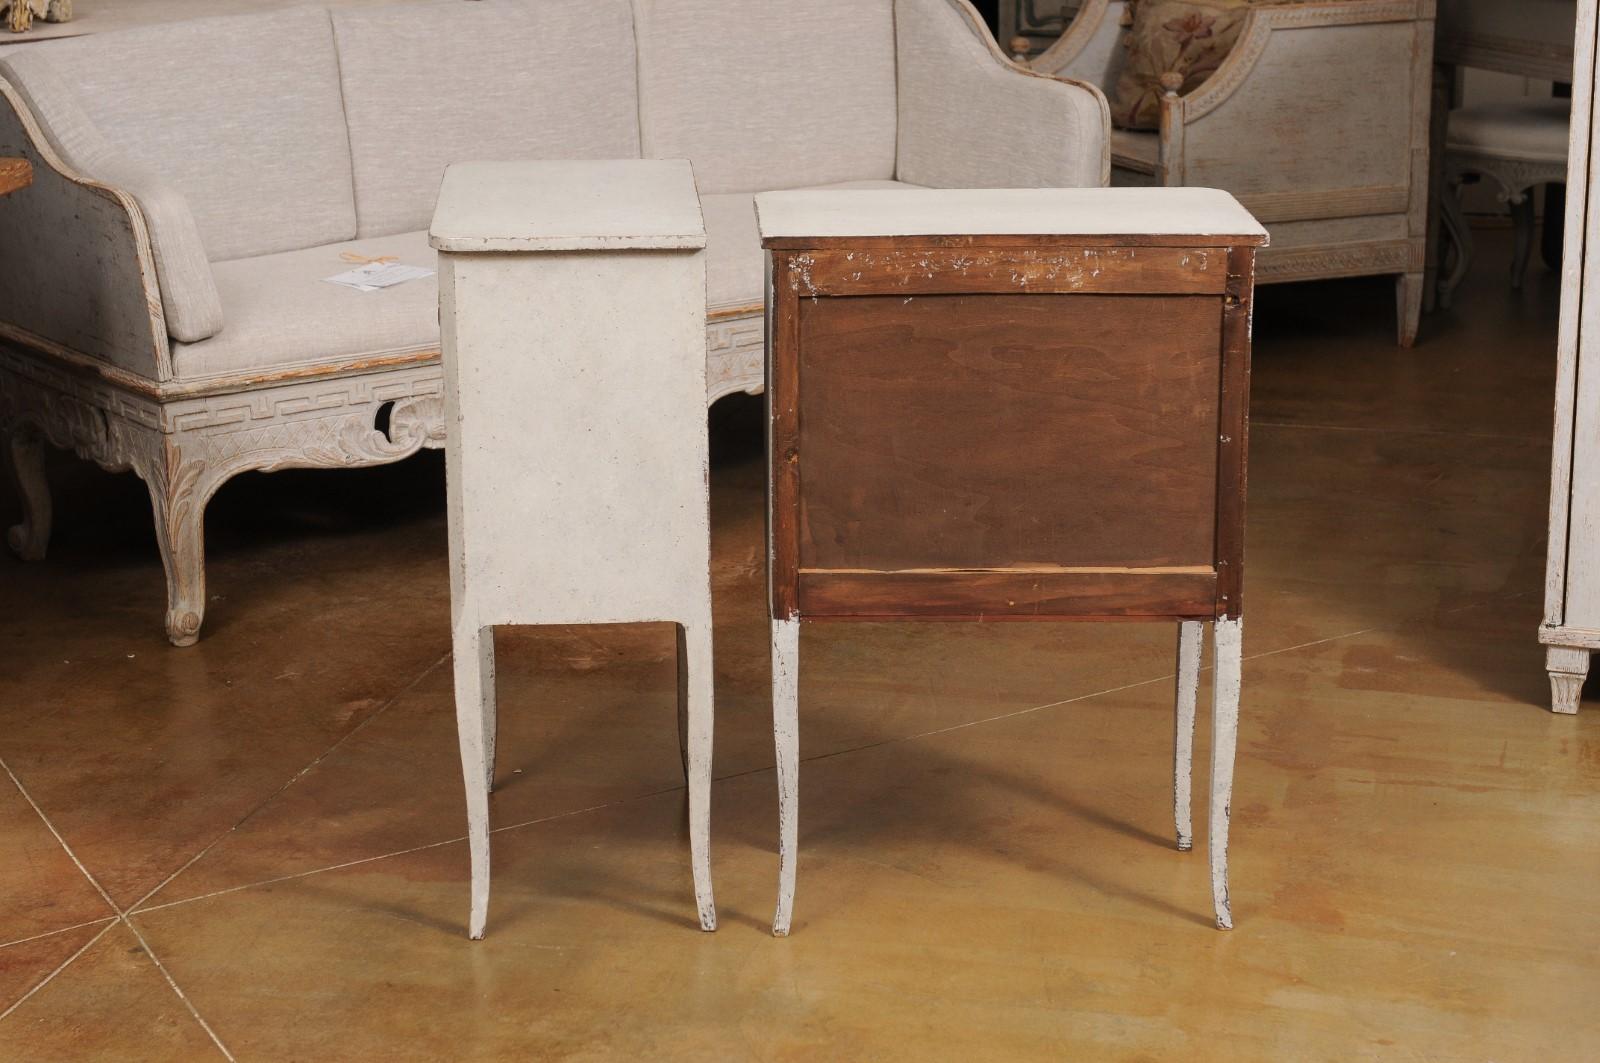 A pair of Swedish bedside tables from the 20th century with light gray painted finish, three drawers, ornate hardware, curving legs and carved aprons. Embodying the quintessence of Scandinavian elegance, this duo of Swedish 20th-century bedside